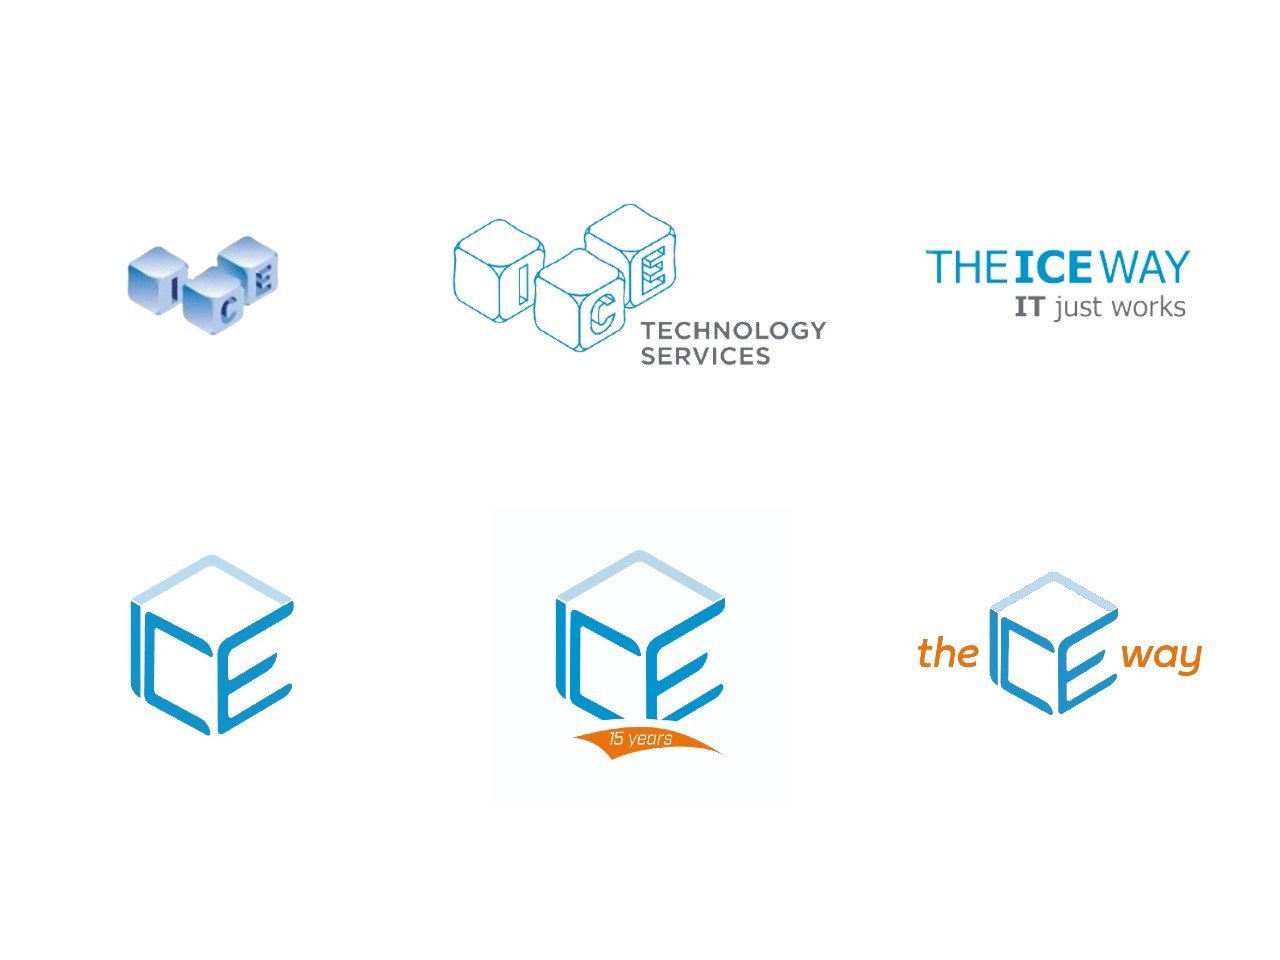 ICE Technology Services & theICEway: Beginnings